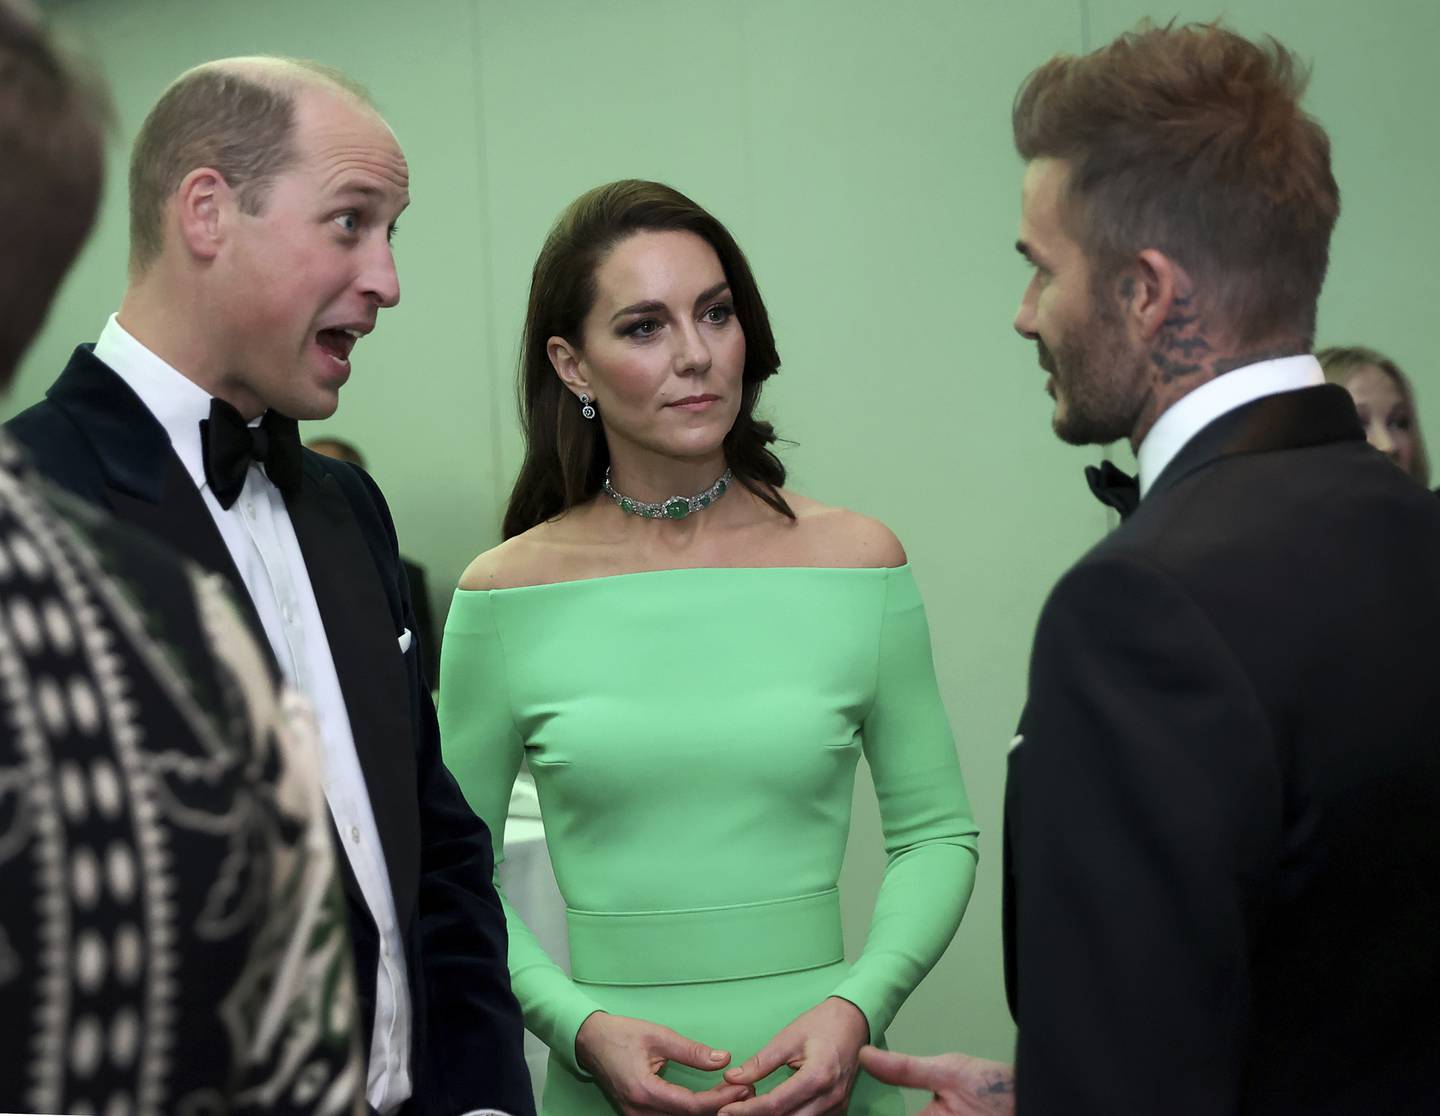 Kate, Princess of Wales, sports a rented dress as she chats with David Beckham and her husband Prince William at The Earthshot Prize awards on Friday. AP